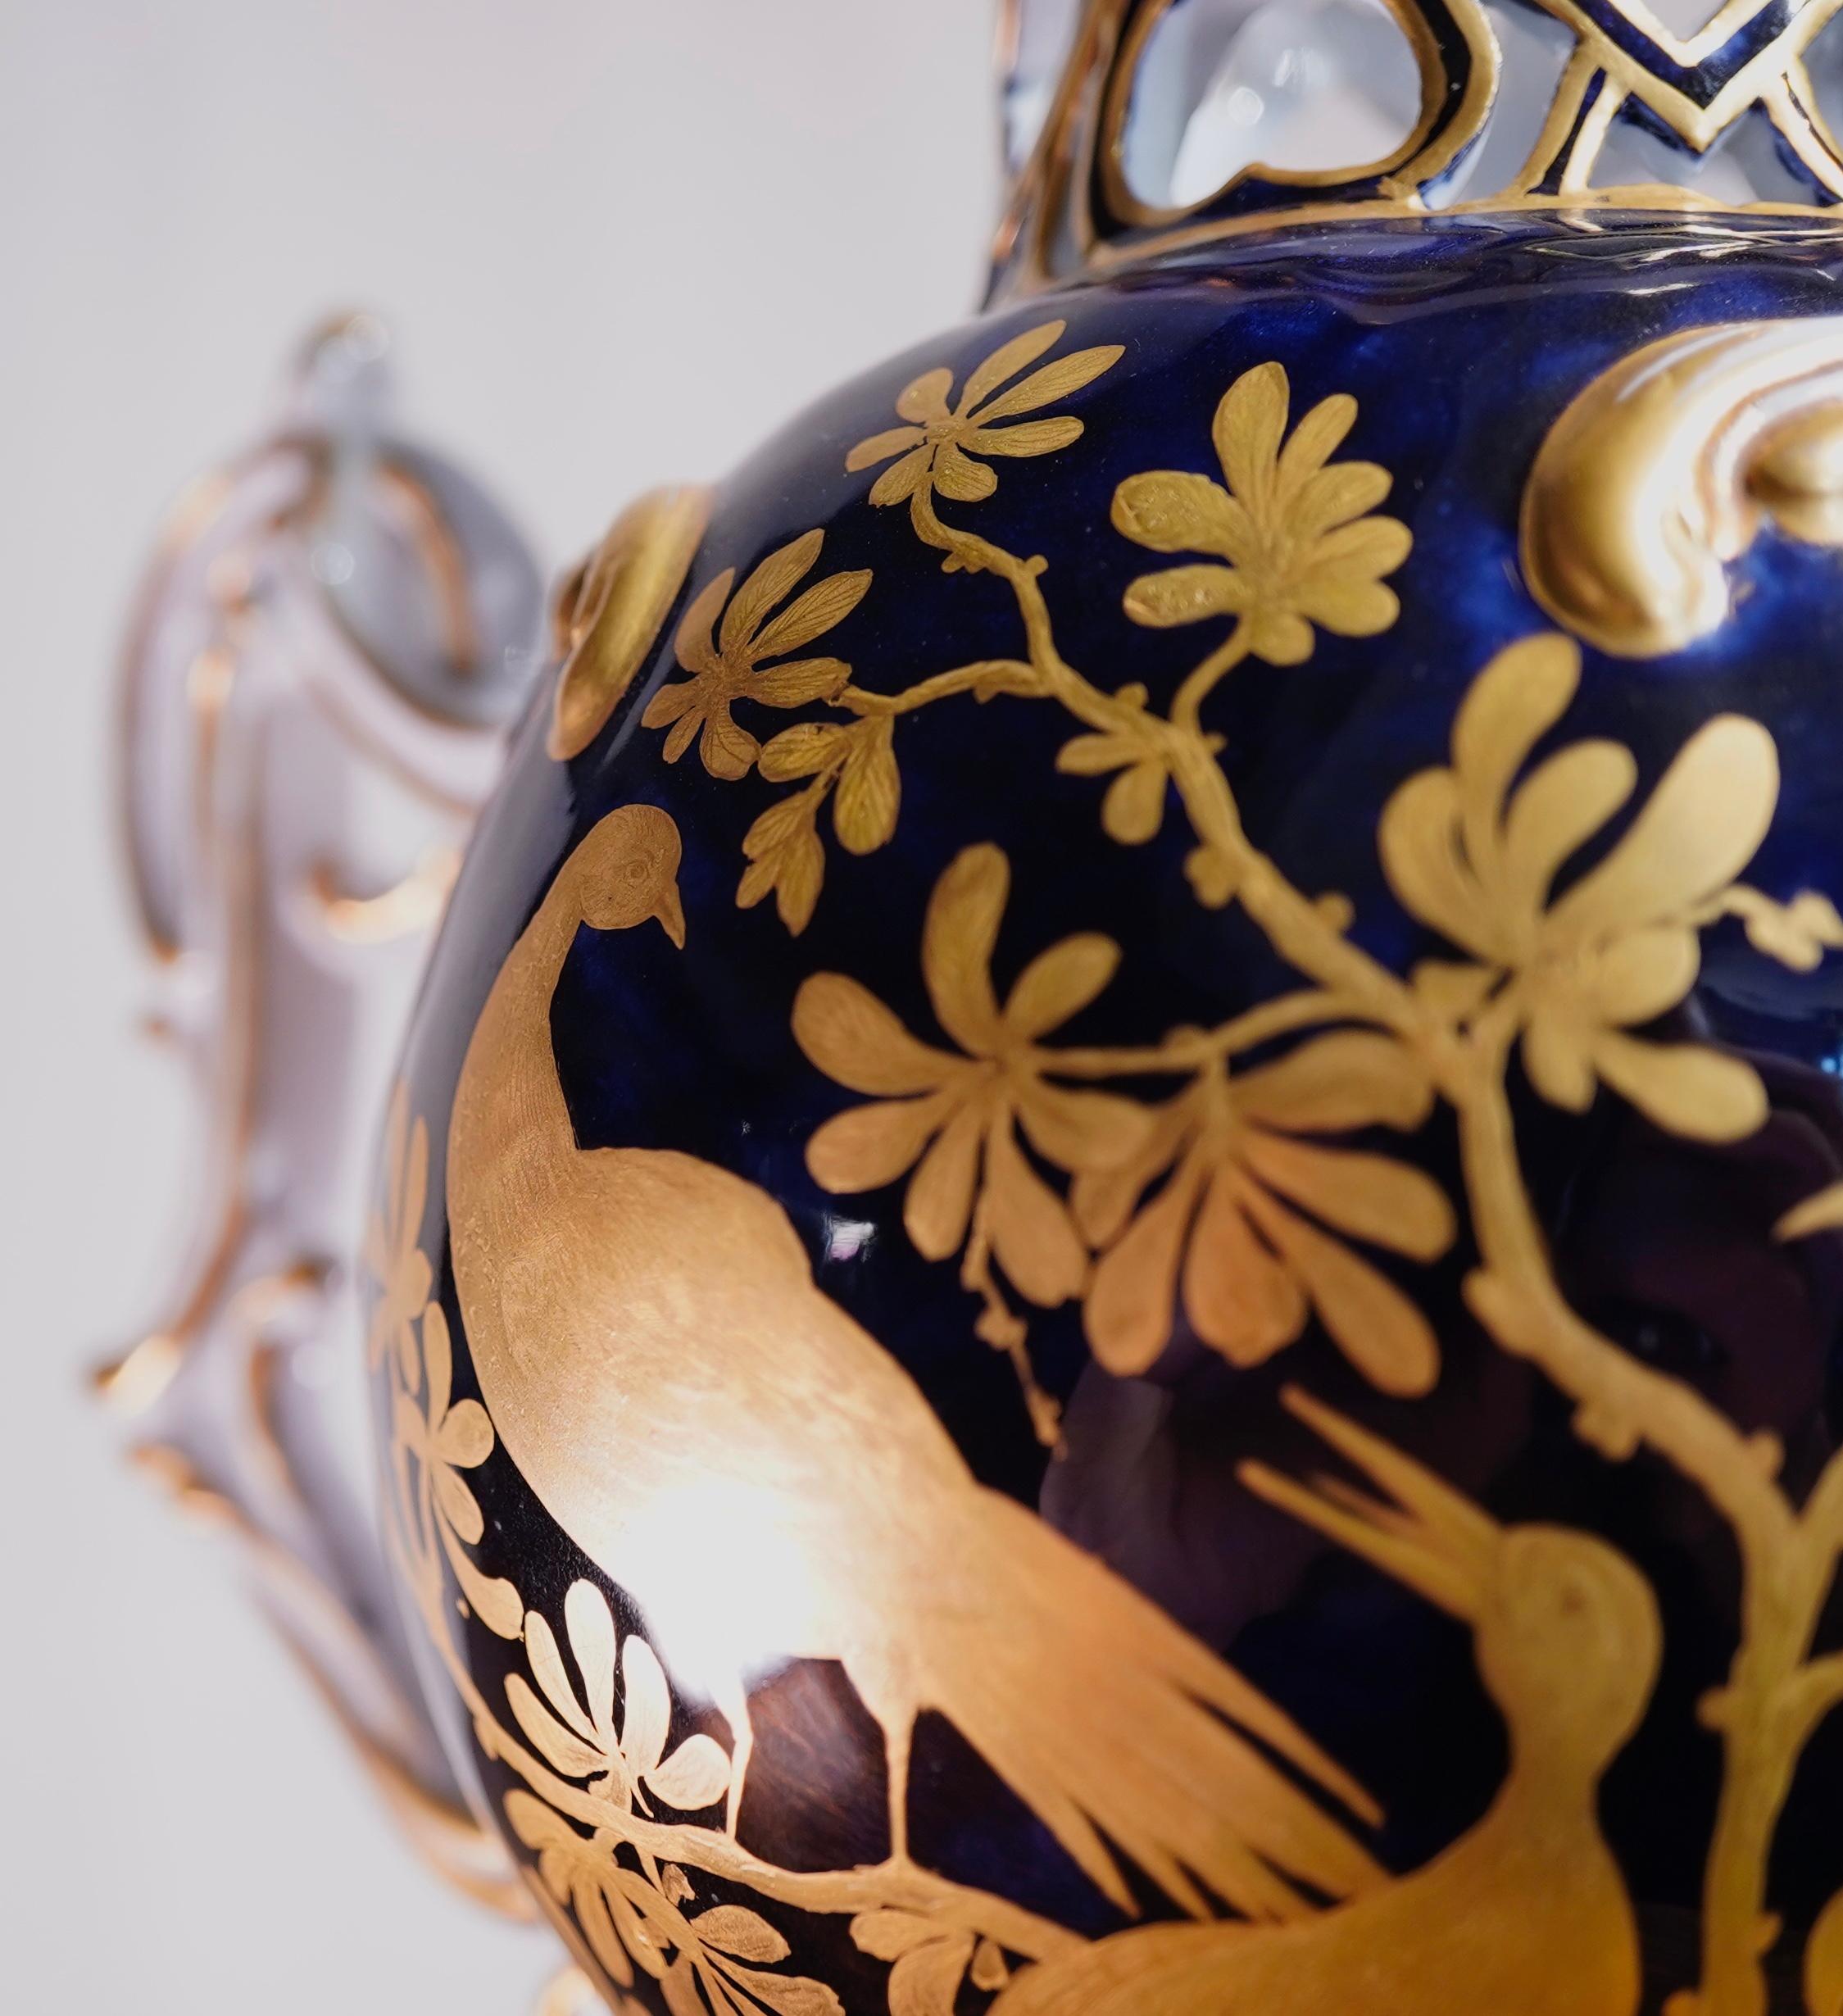 Chelsea Gold Anchor Vase, 'Dudley' Type, circa 1765 For Sale 1